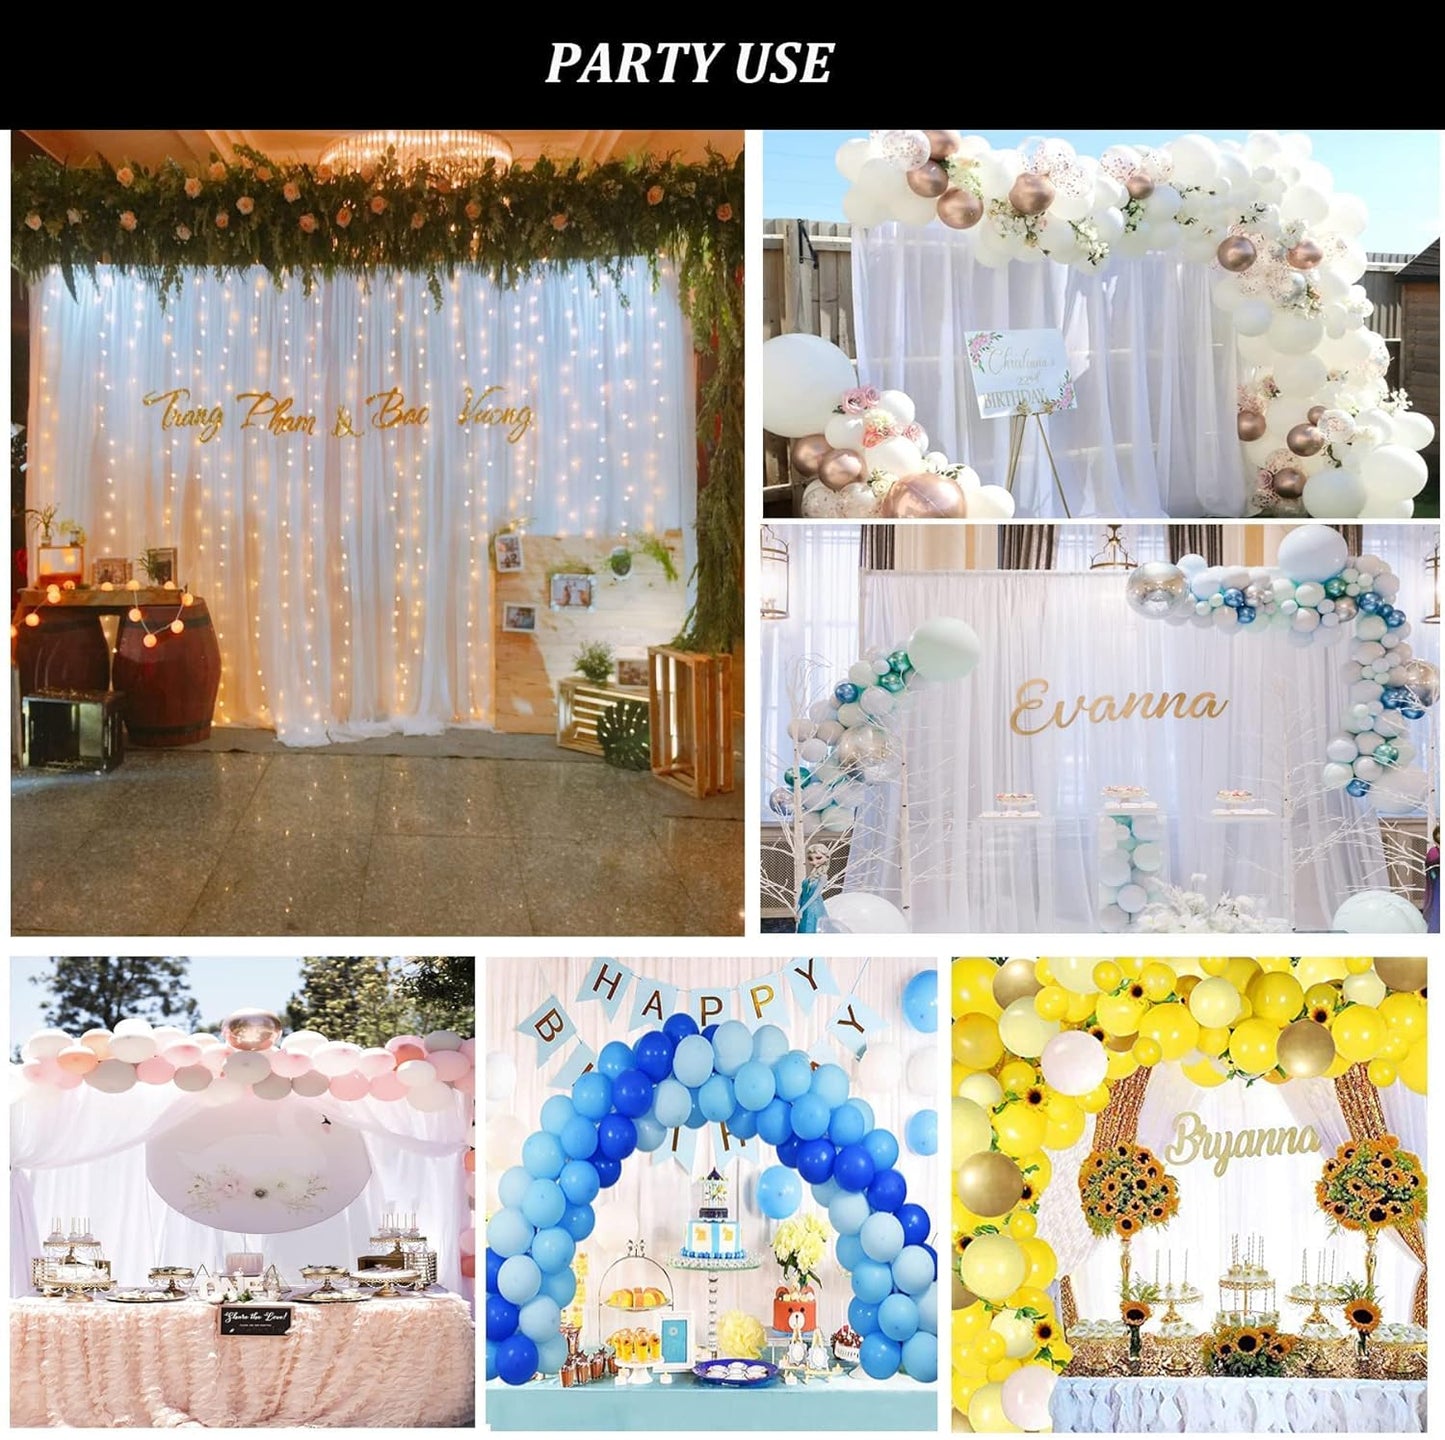 10Ft X 10Ft White Chiffon Backdrop Curtains, Wrinkle-Free Sheer Chiffon Fabric Curtain Drapes for Wedding Ceremony Arch Party Stage Decoration  Wish Care   